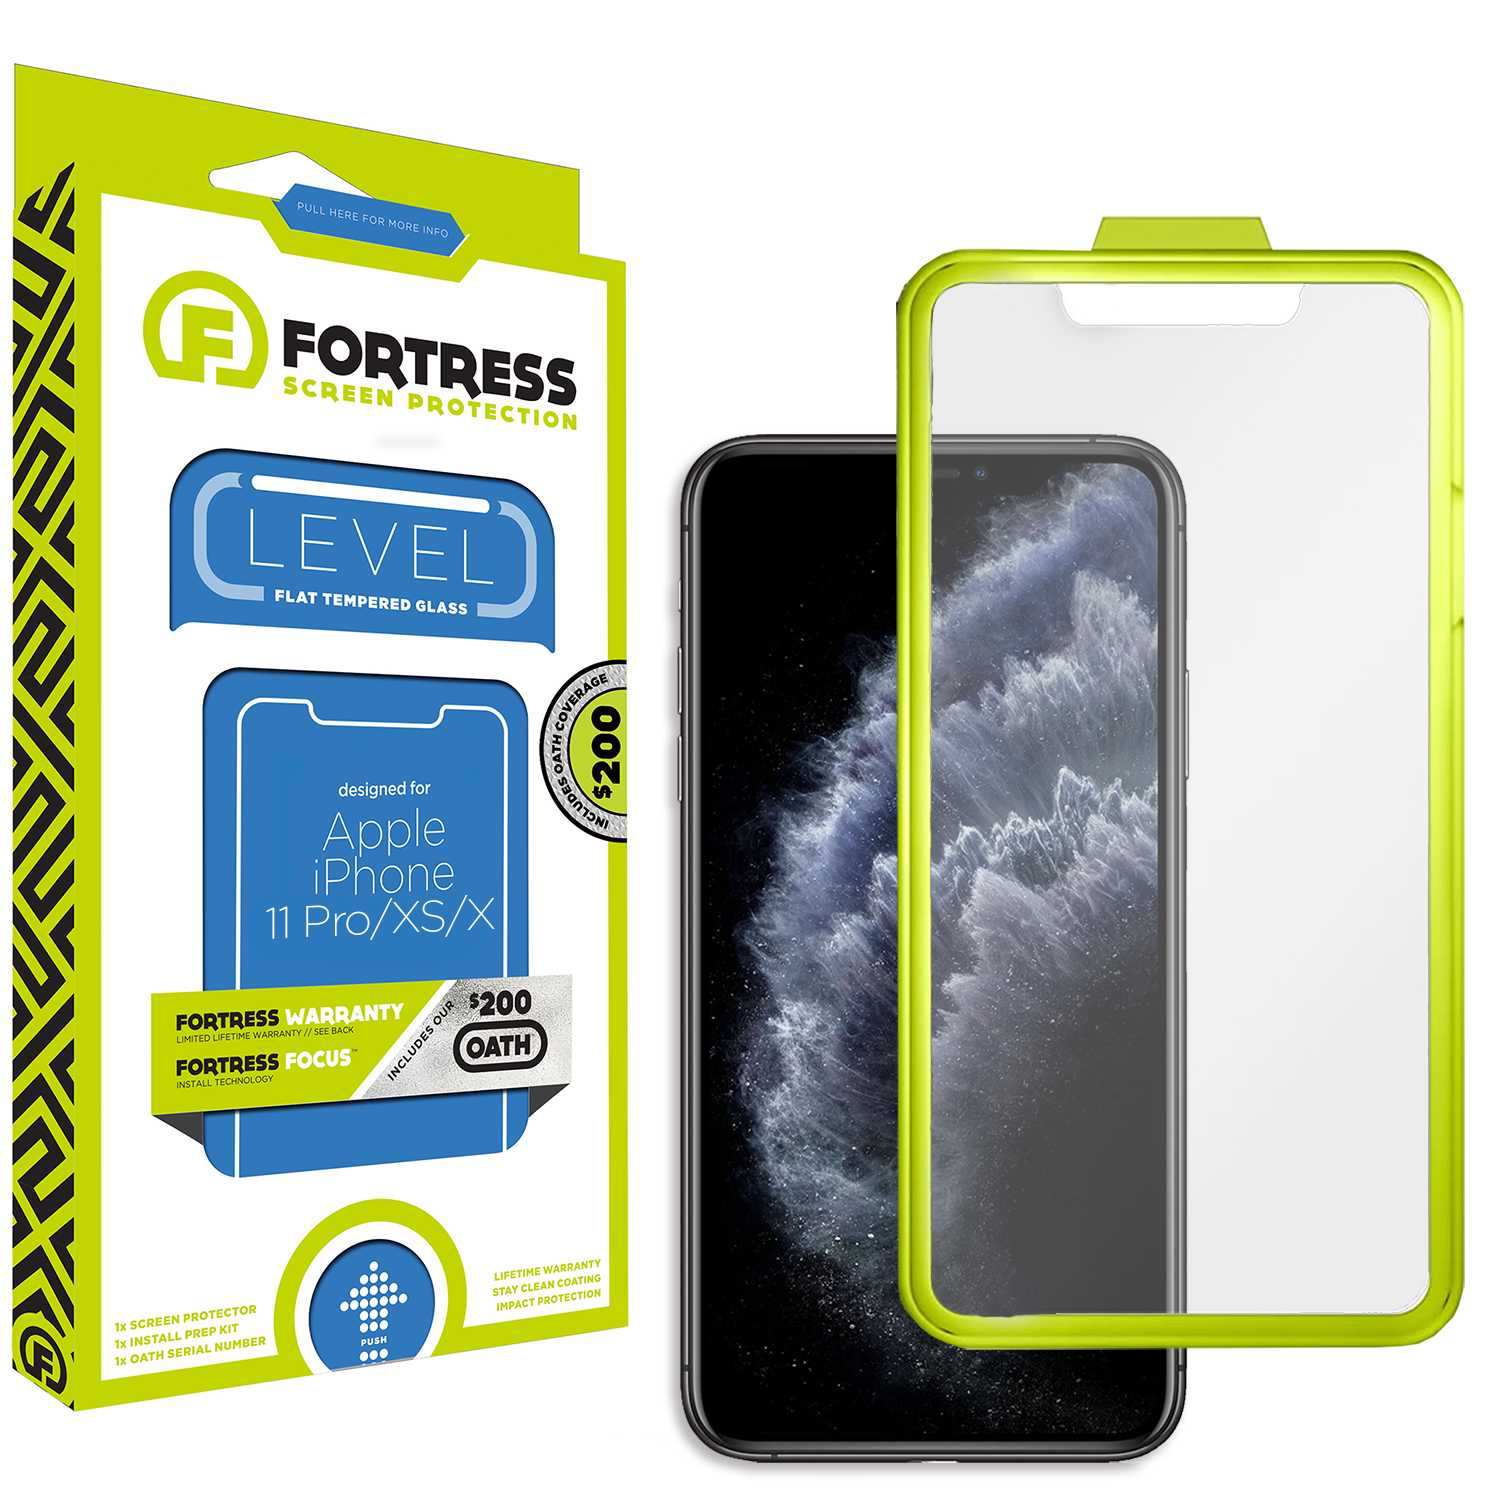 Fortress iPhone XS Screen Protector $200CoverageInstallTool Scooch Screen Protector